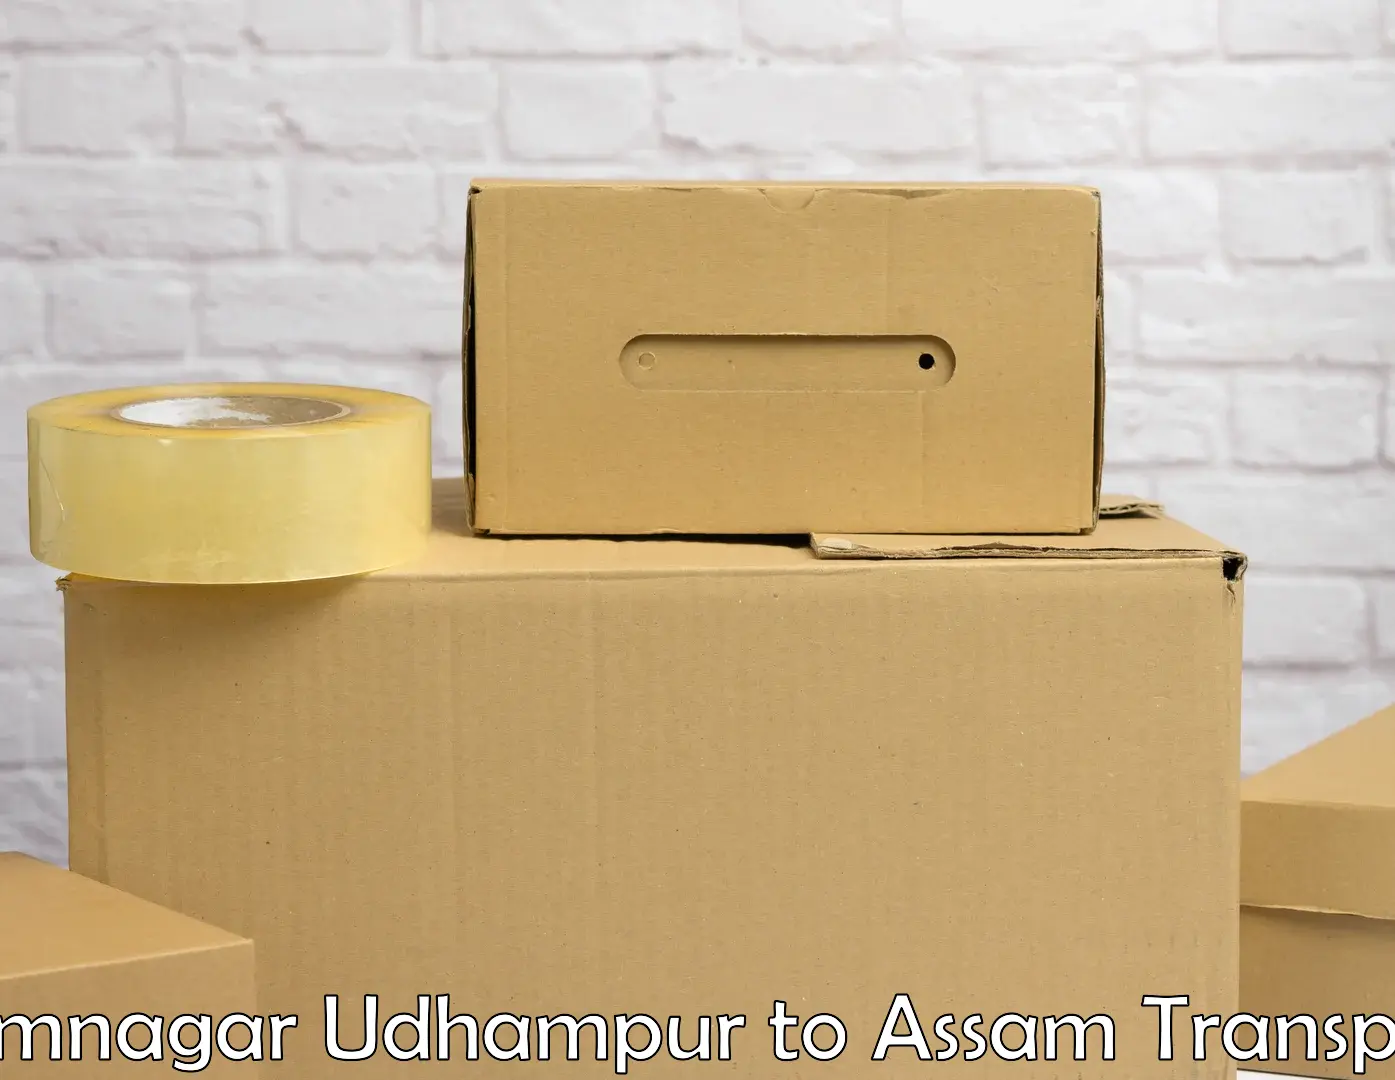 Cargo transport services in Ramnagar Udhampur to Lala Assam